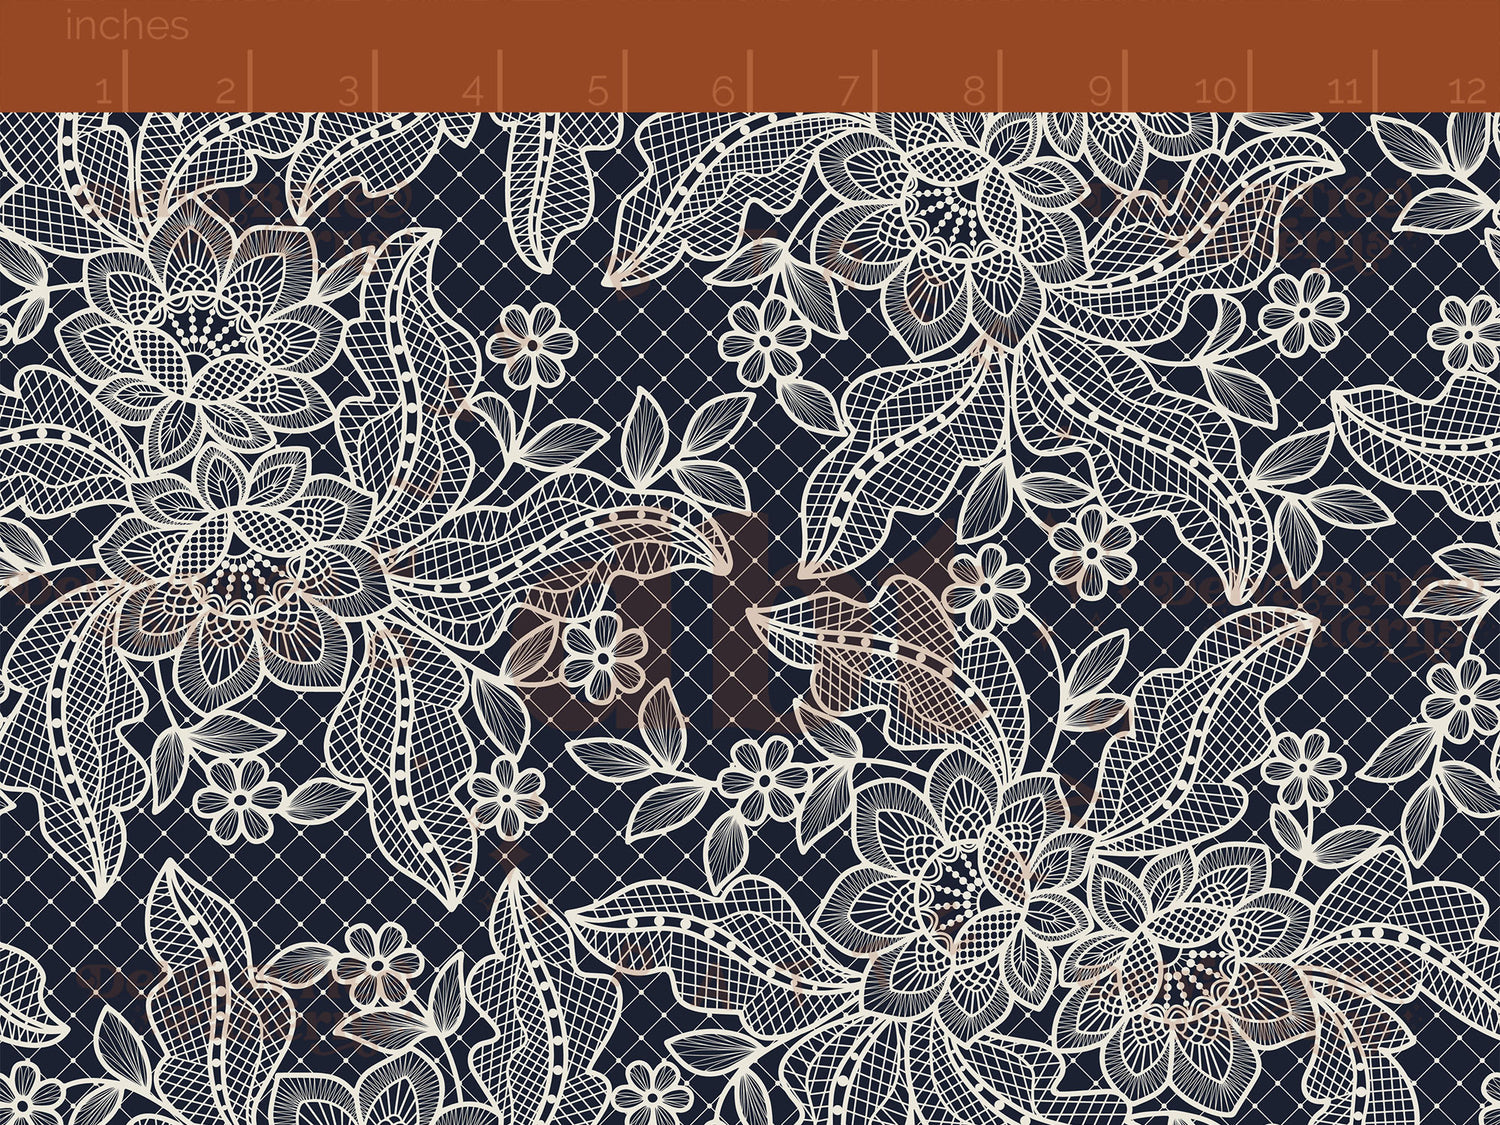 Vintage off white flowers, leaves and faux lace netting on a navy blue background seamless pattern scale digital file for small shops that make handmade products in small batches.